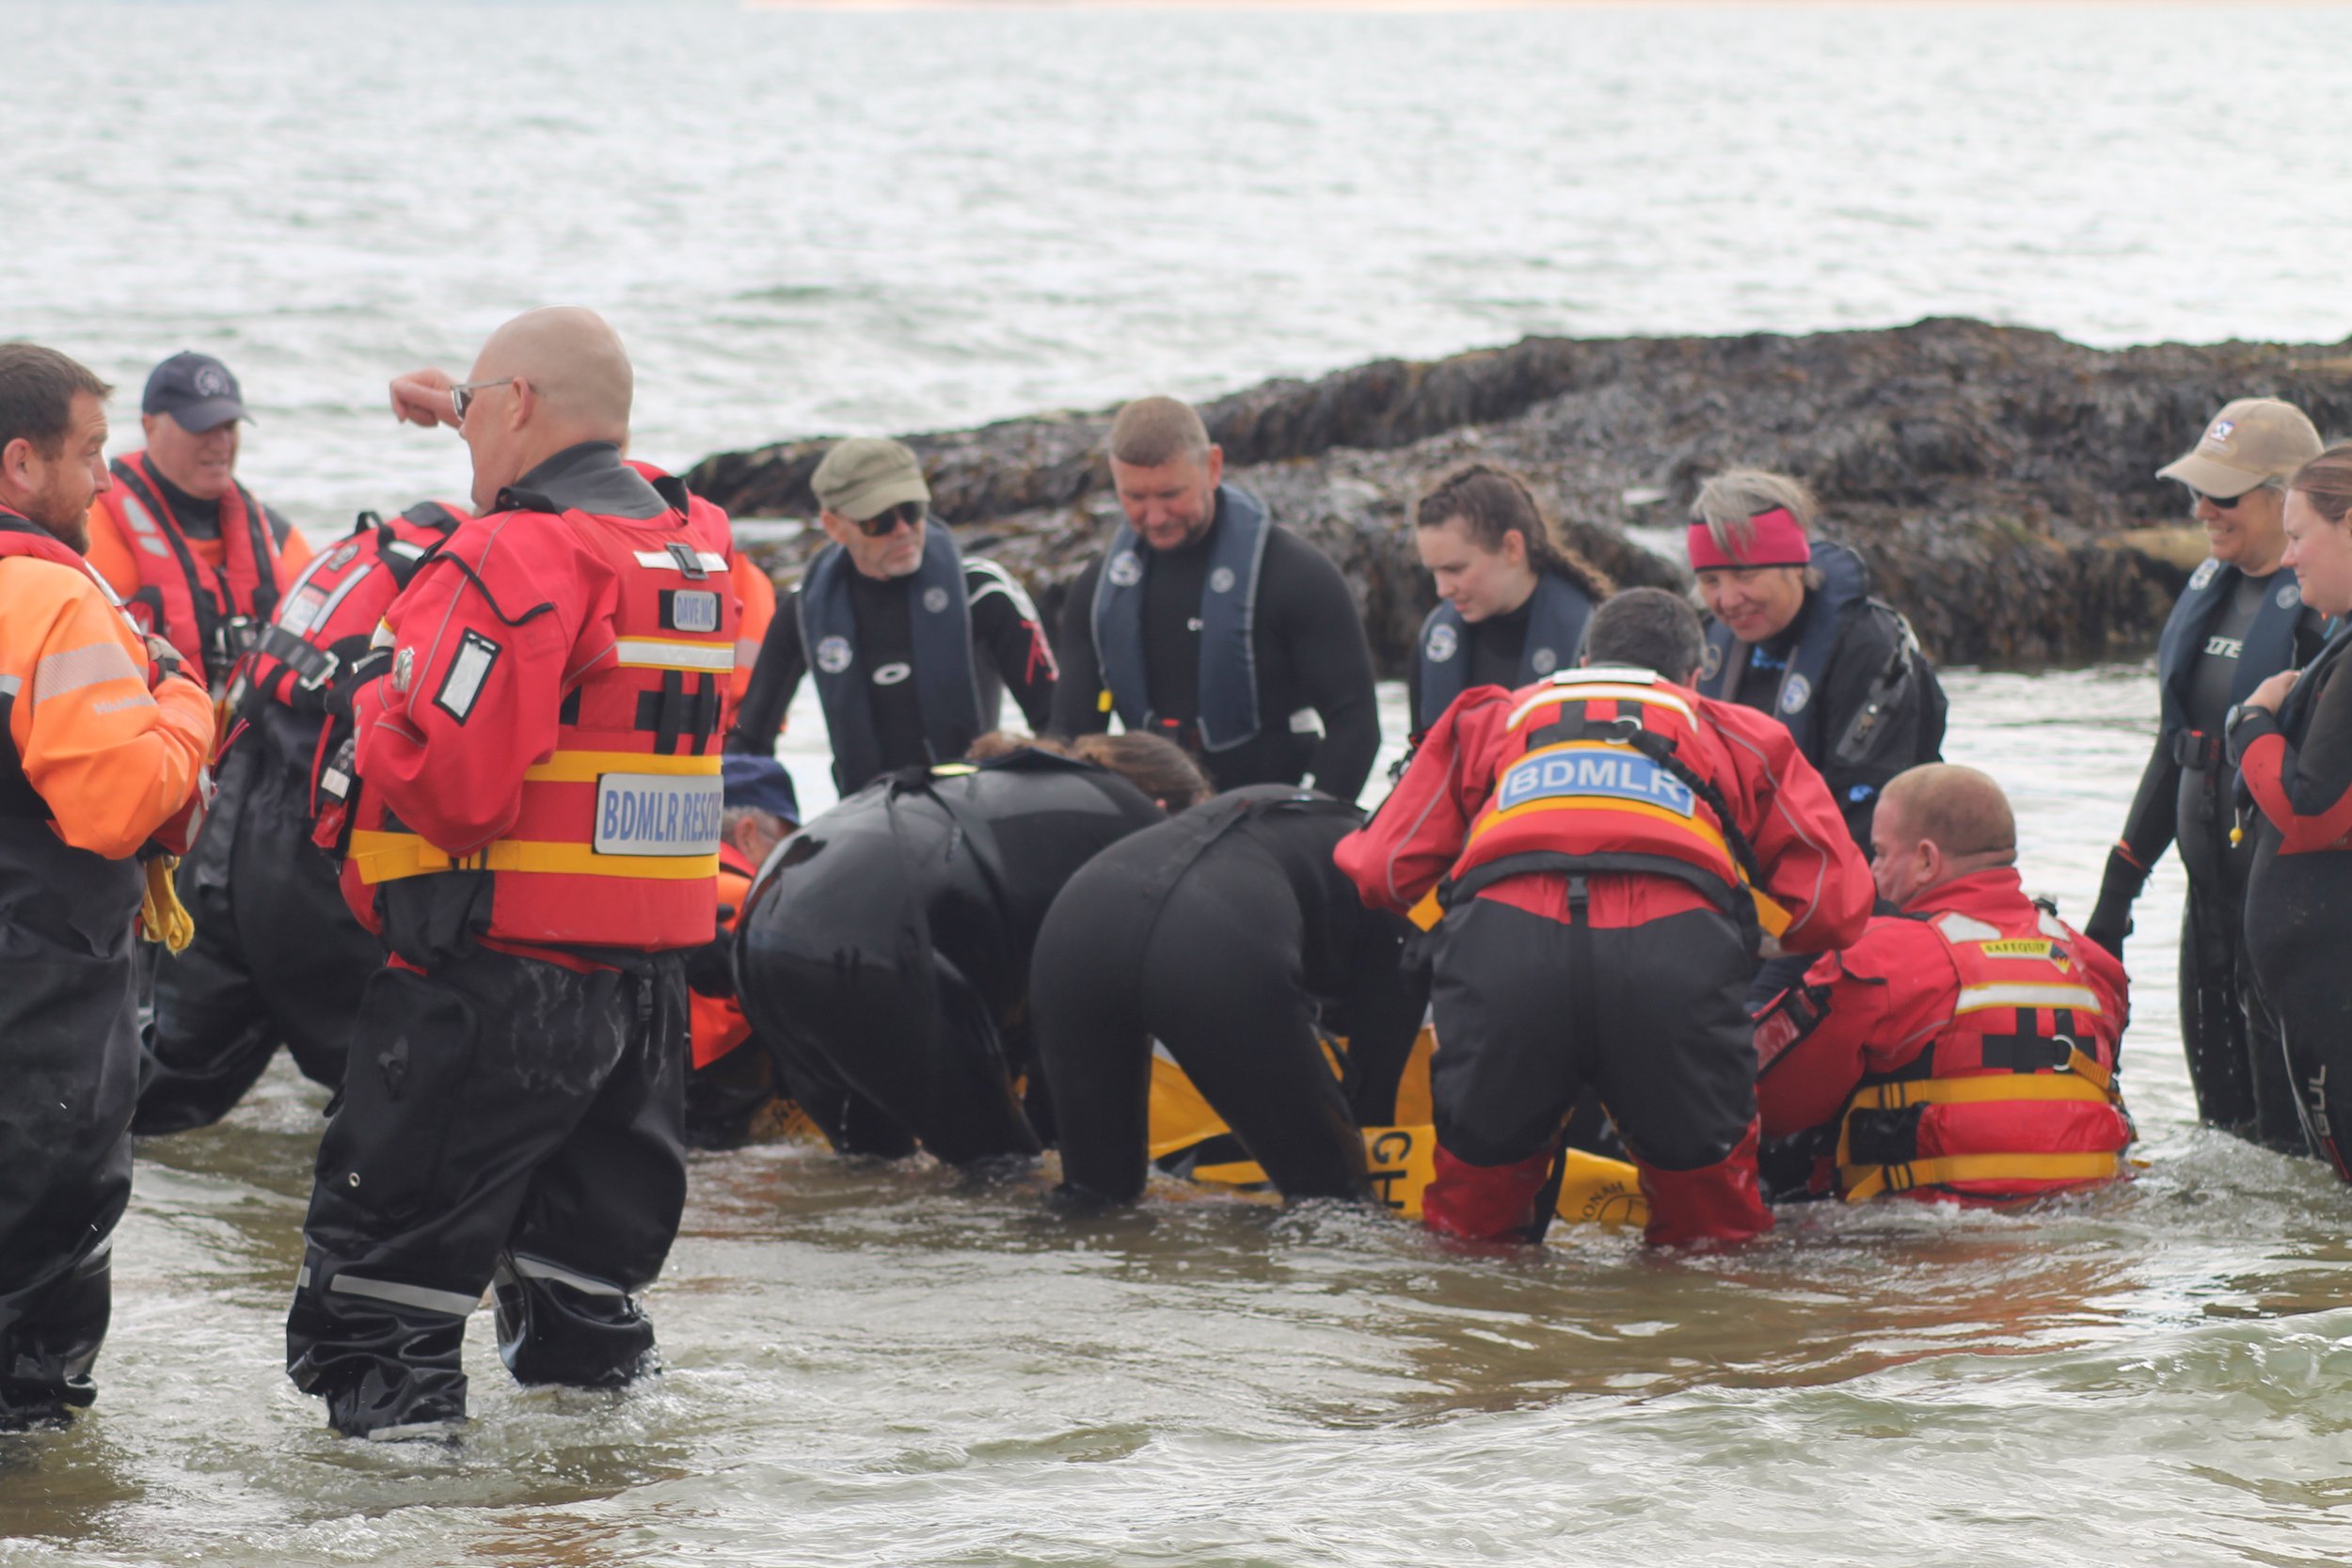 Attaching pontoons to the canopy on which the stranded whale has been placed, to help float the animal